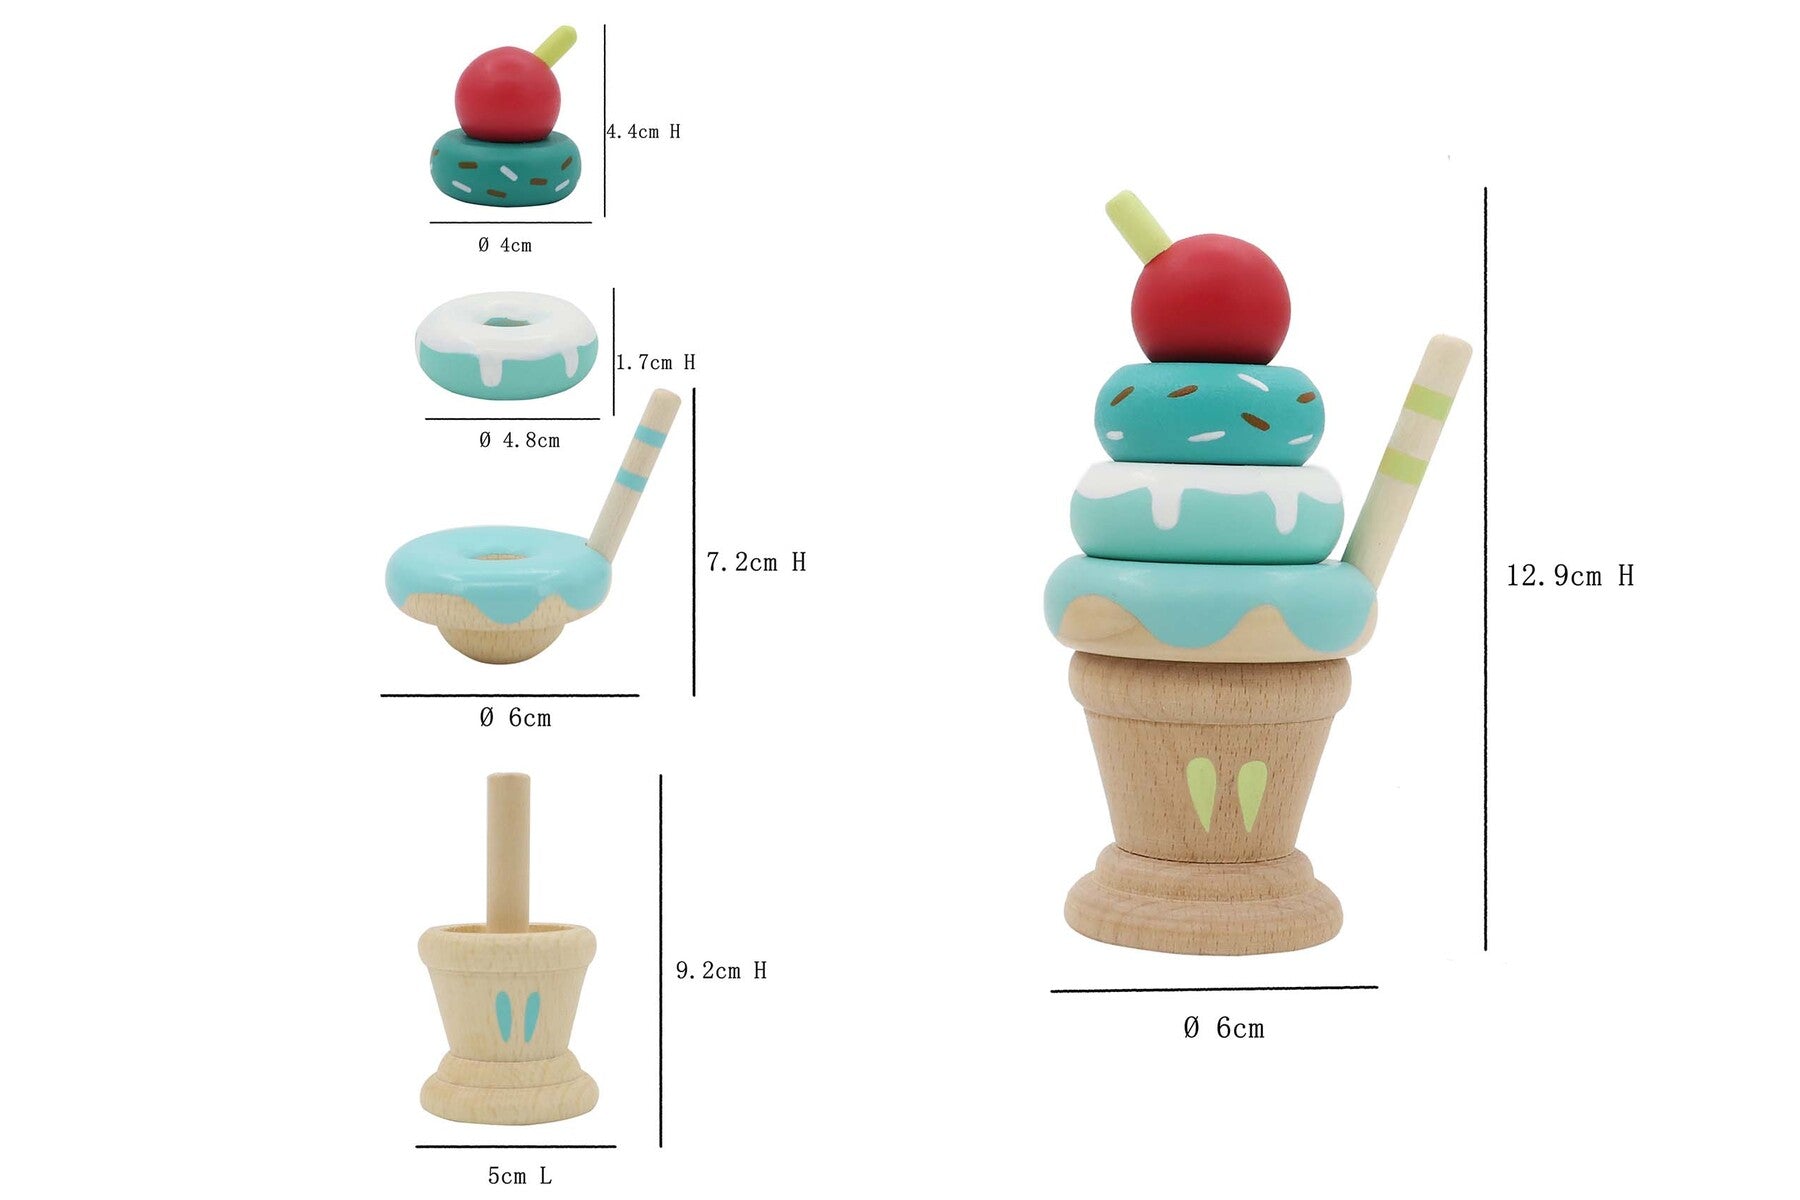 Calm and Breezy Stacking Icecream Mint